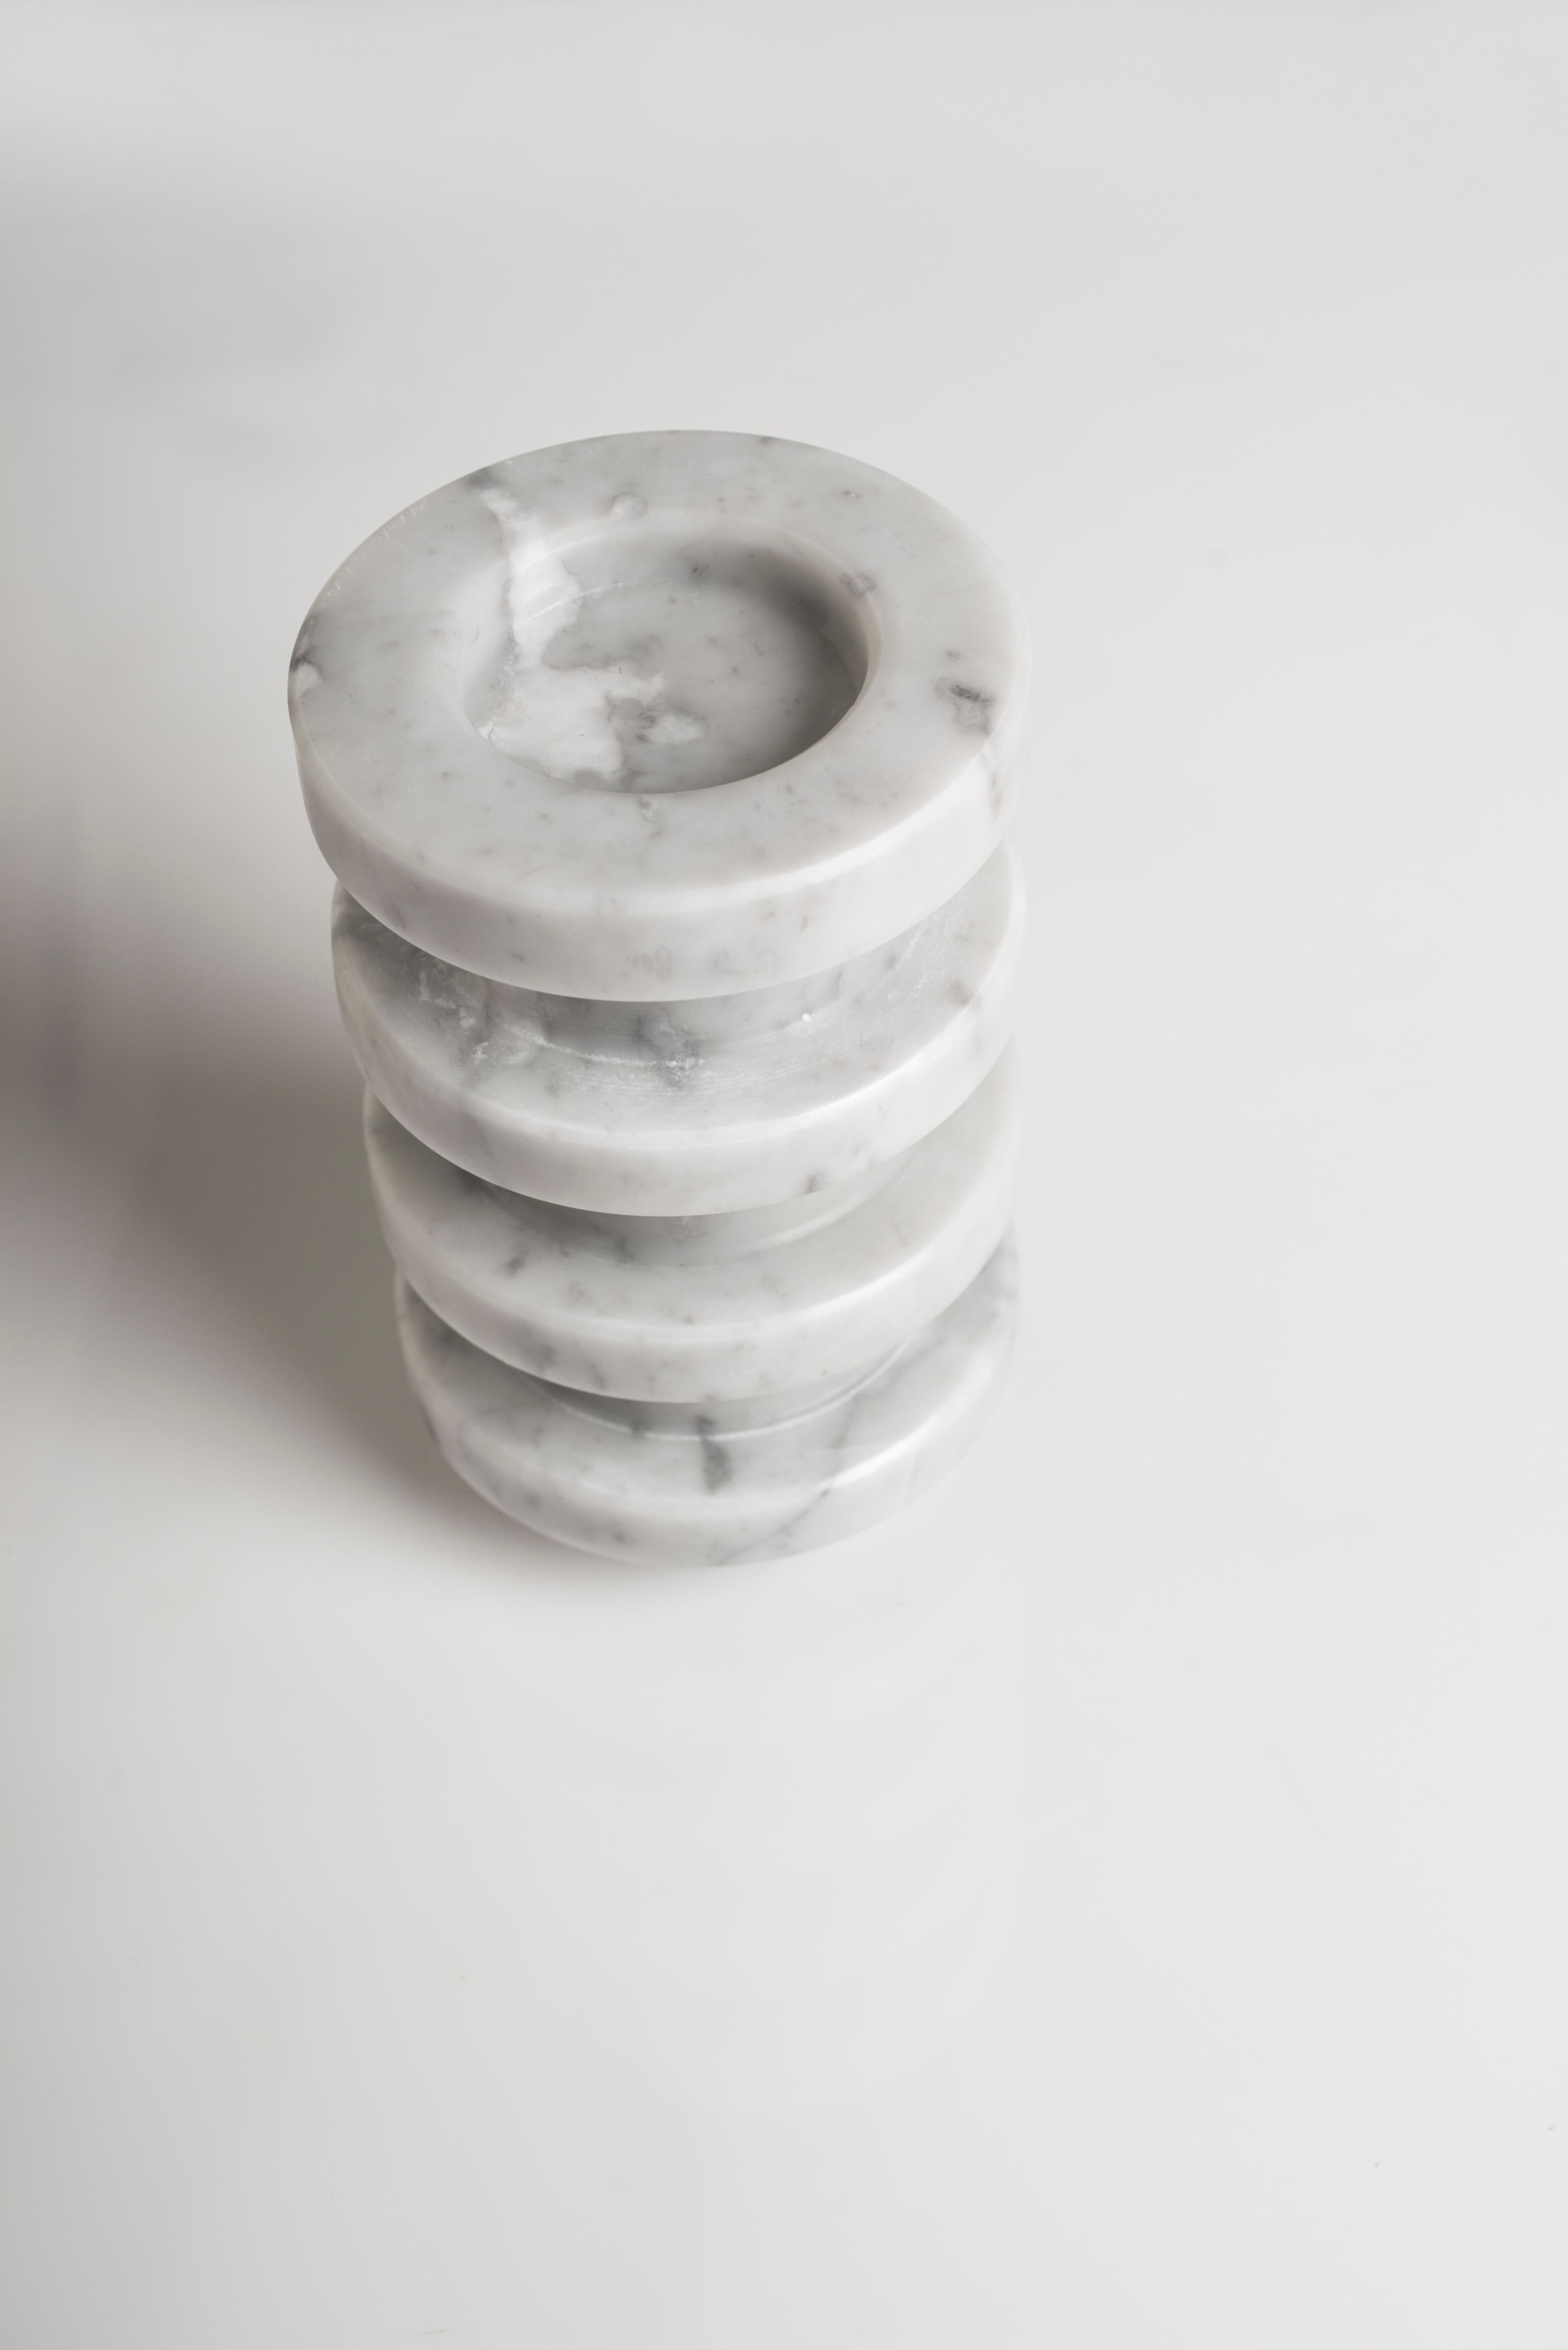 Pisa sculpture by Carlo Massoud.
Handmade. 
Dimensions: D 10 x H 20 cm 
Materials: Carrara Marble

Carlo Massoud’s work stems from his relentless questioning of social, political, cultural, and environmental norms. He often pushes his viewers